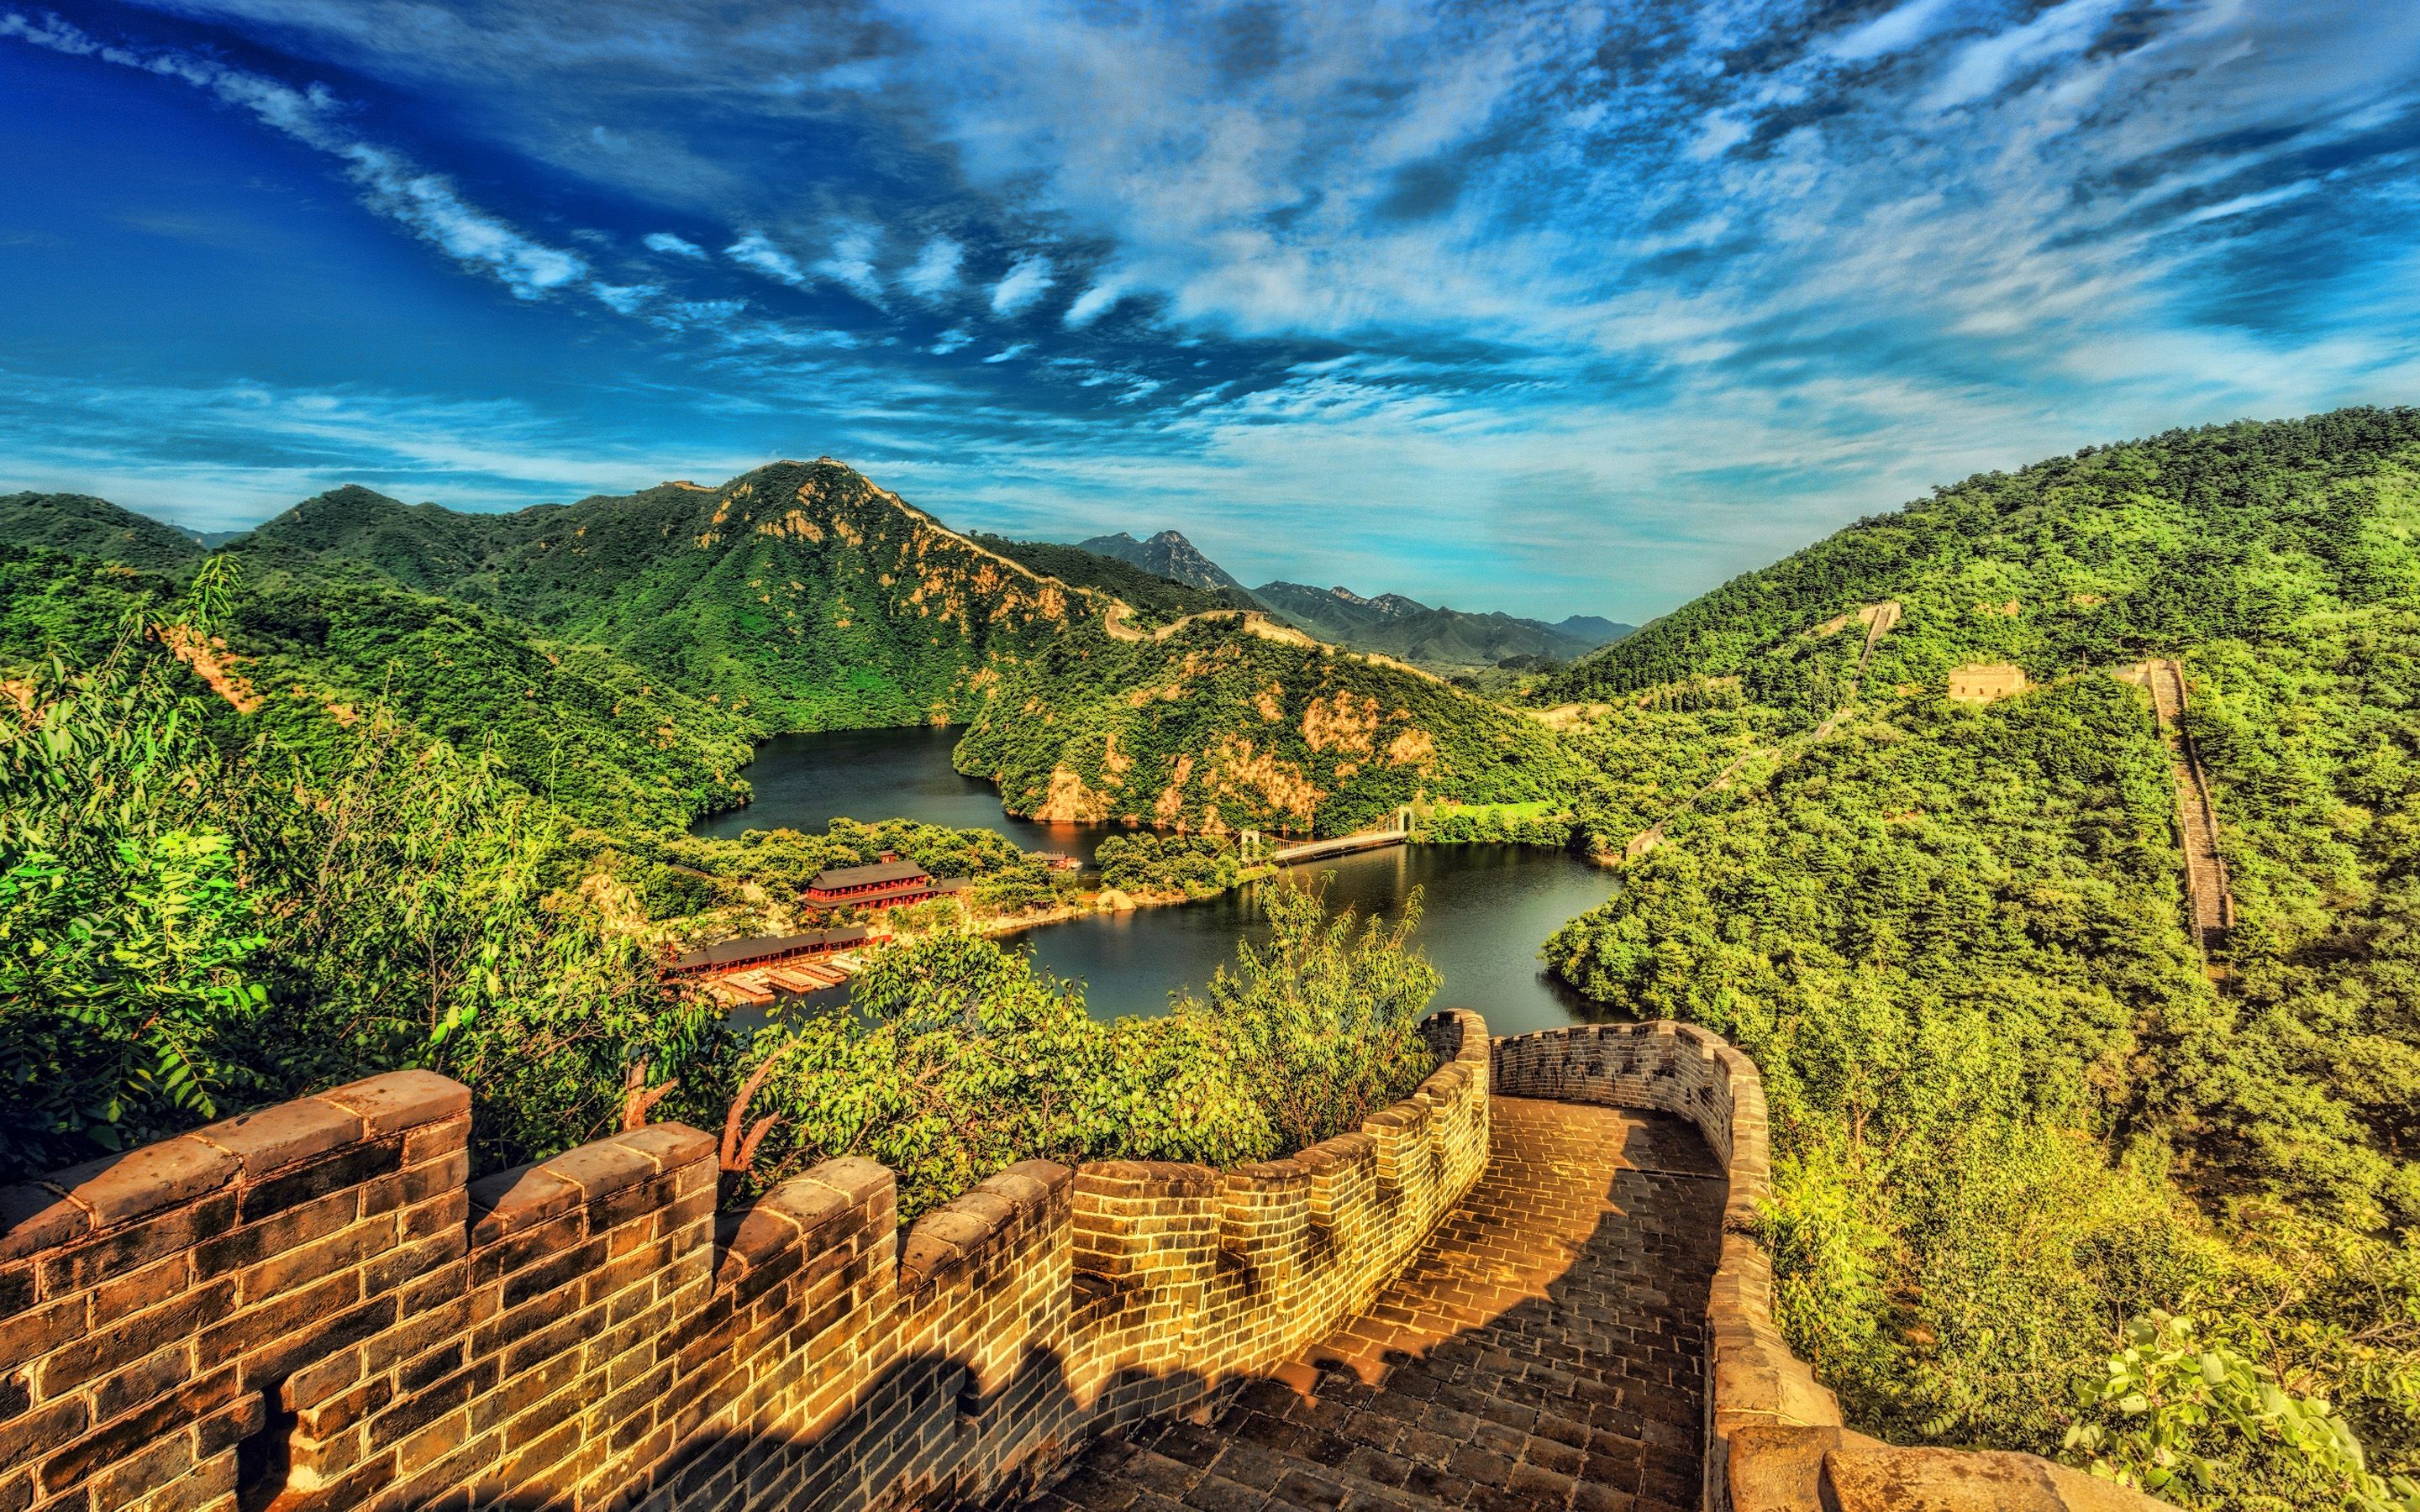 Download wallpaper Great Wall of China, HDR, Chinese landmarks, summer, China, beautiful nature, Asia for desktop with resolution 2880x1800. High Quality HD picture wallpaper